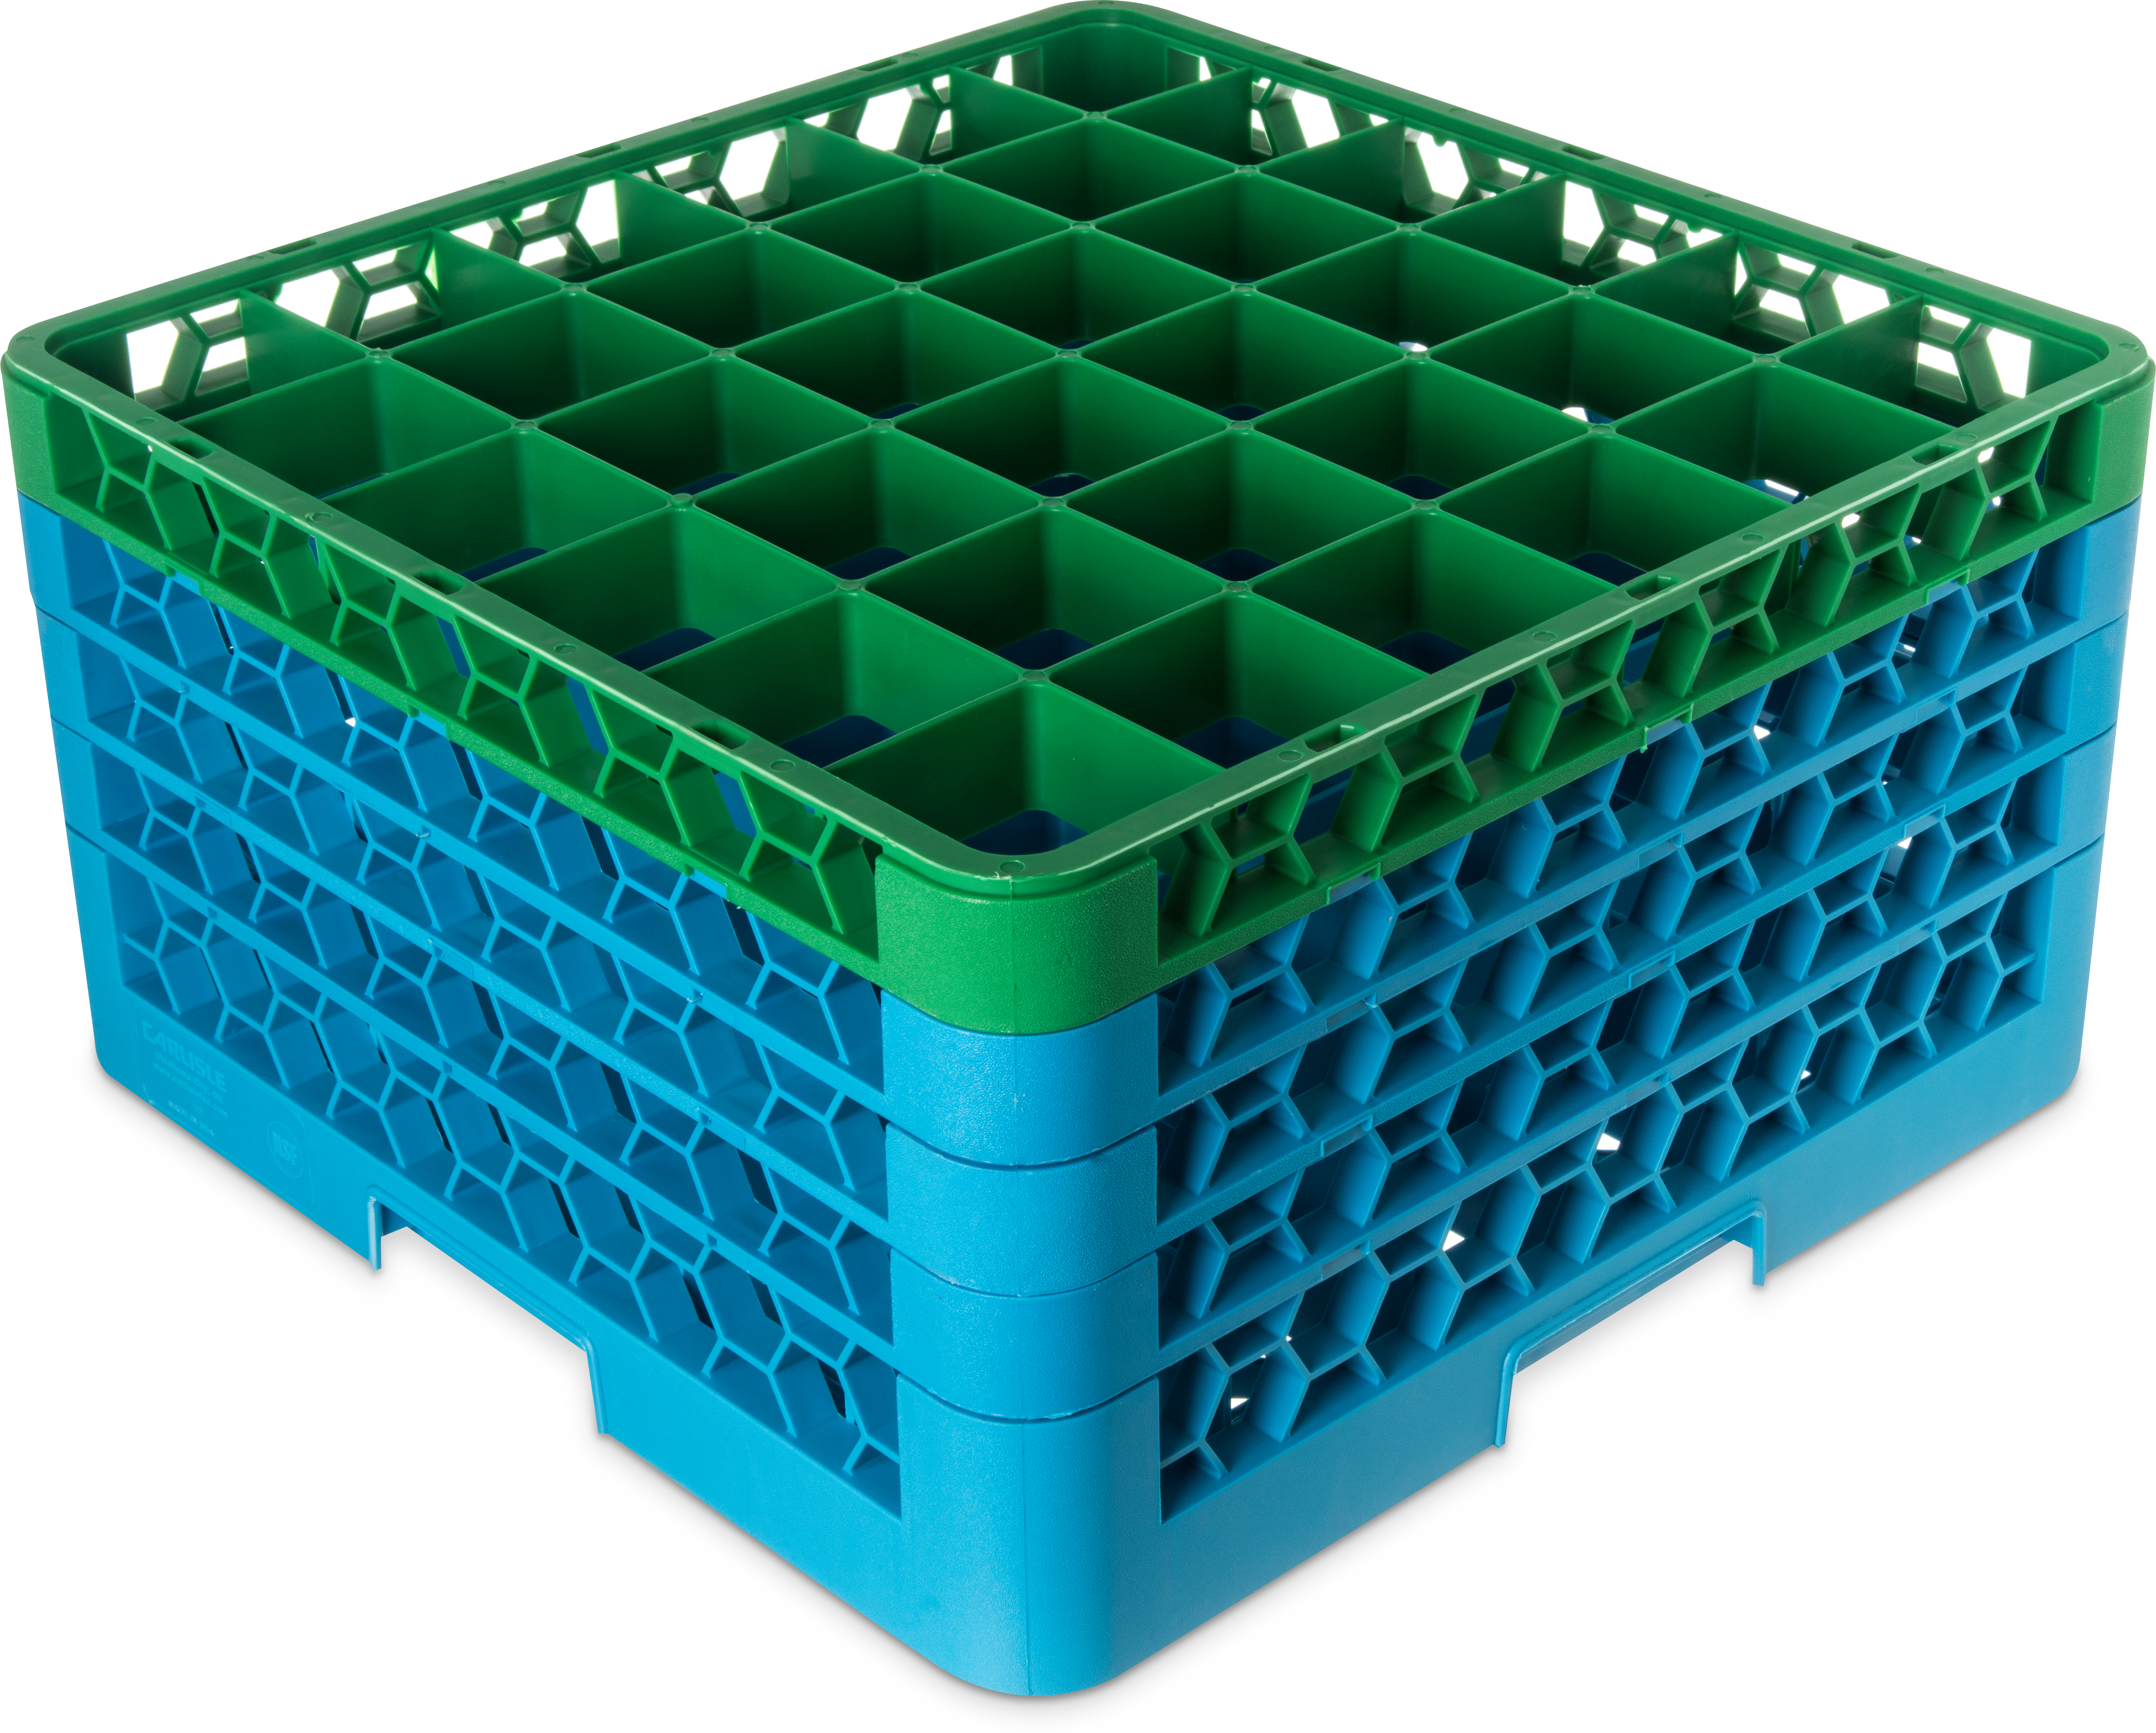 OptiClean 36 Compartment Glass Rack with 4 Extenders 10.3 - Green-Carlisle Blue